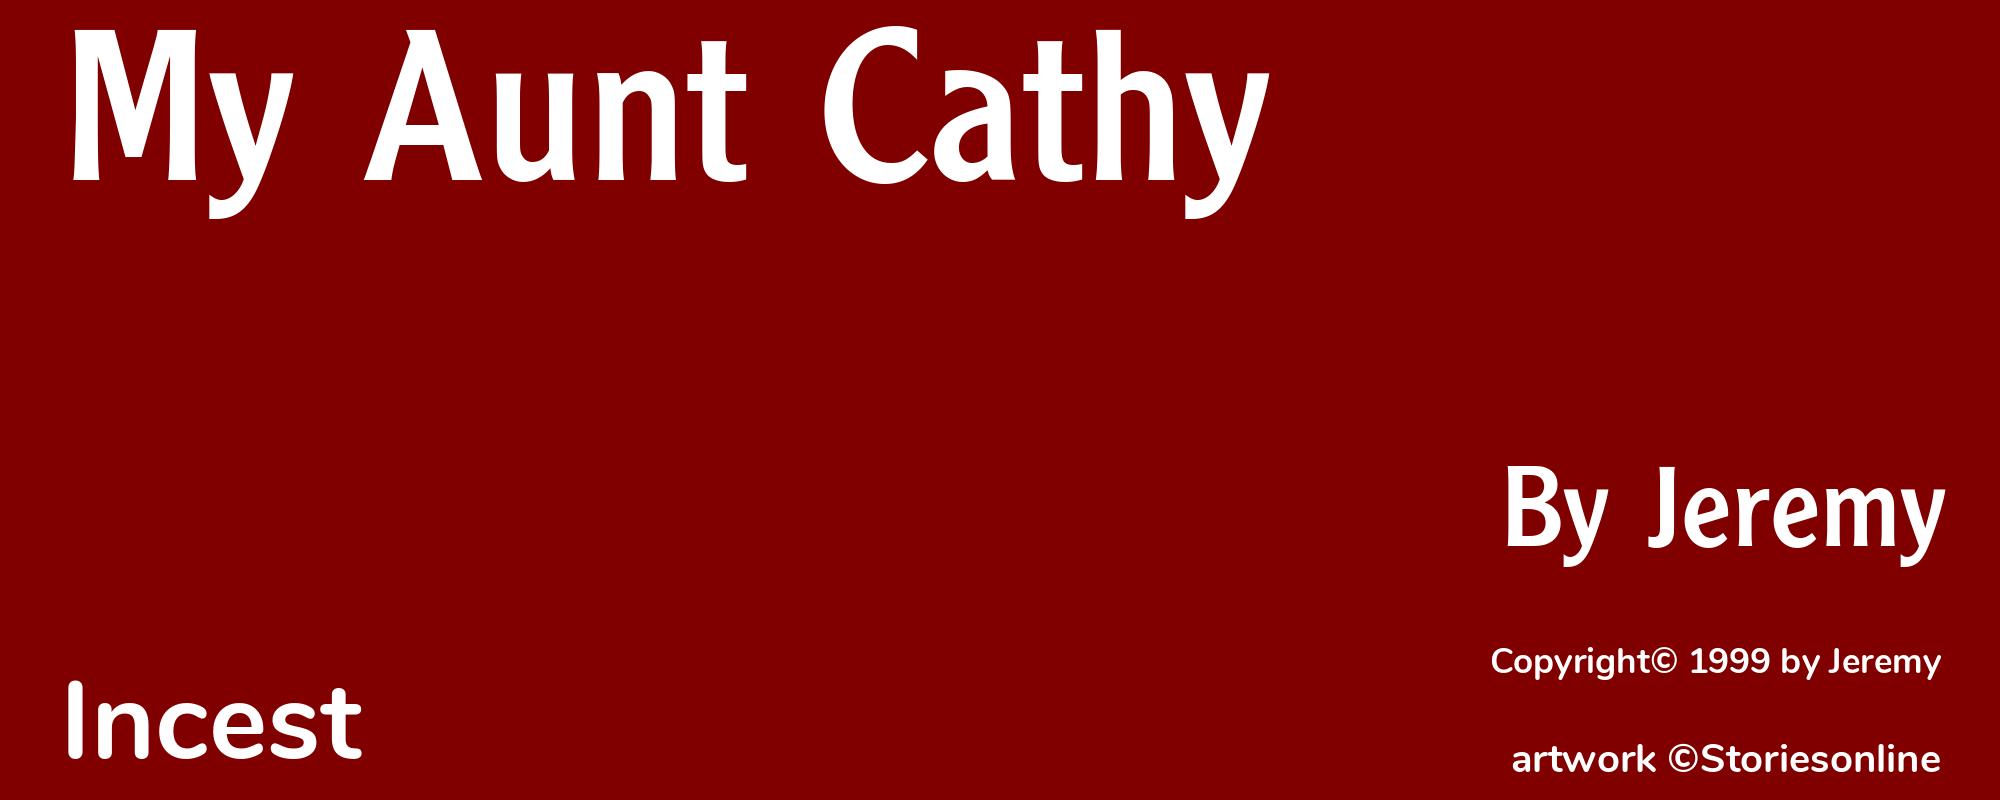 My Aunt Cathy - Cover